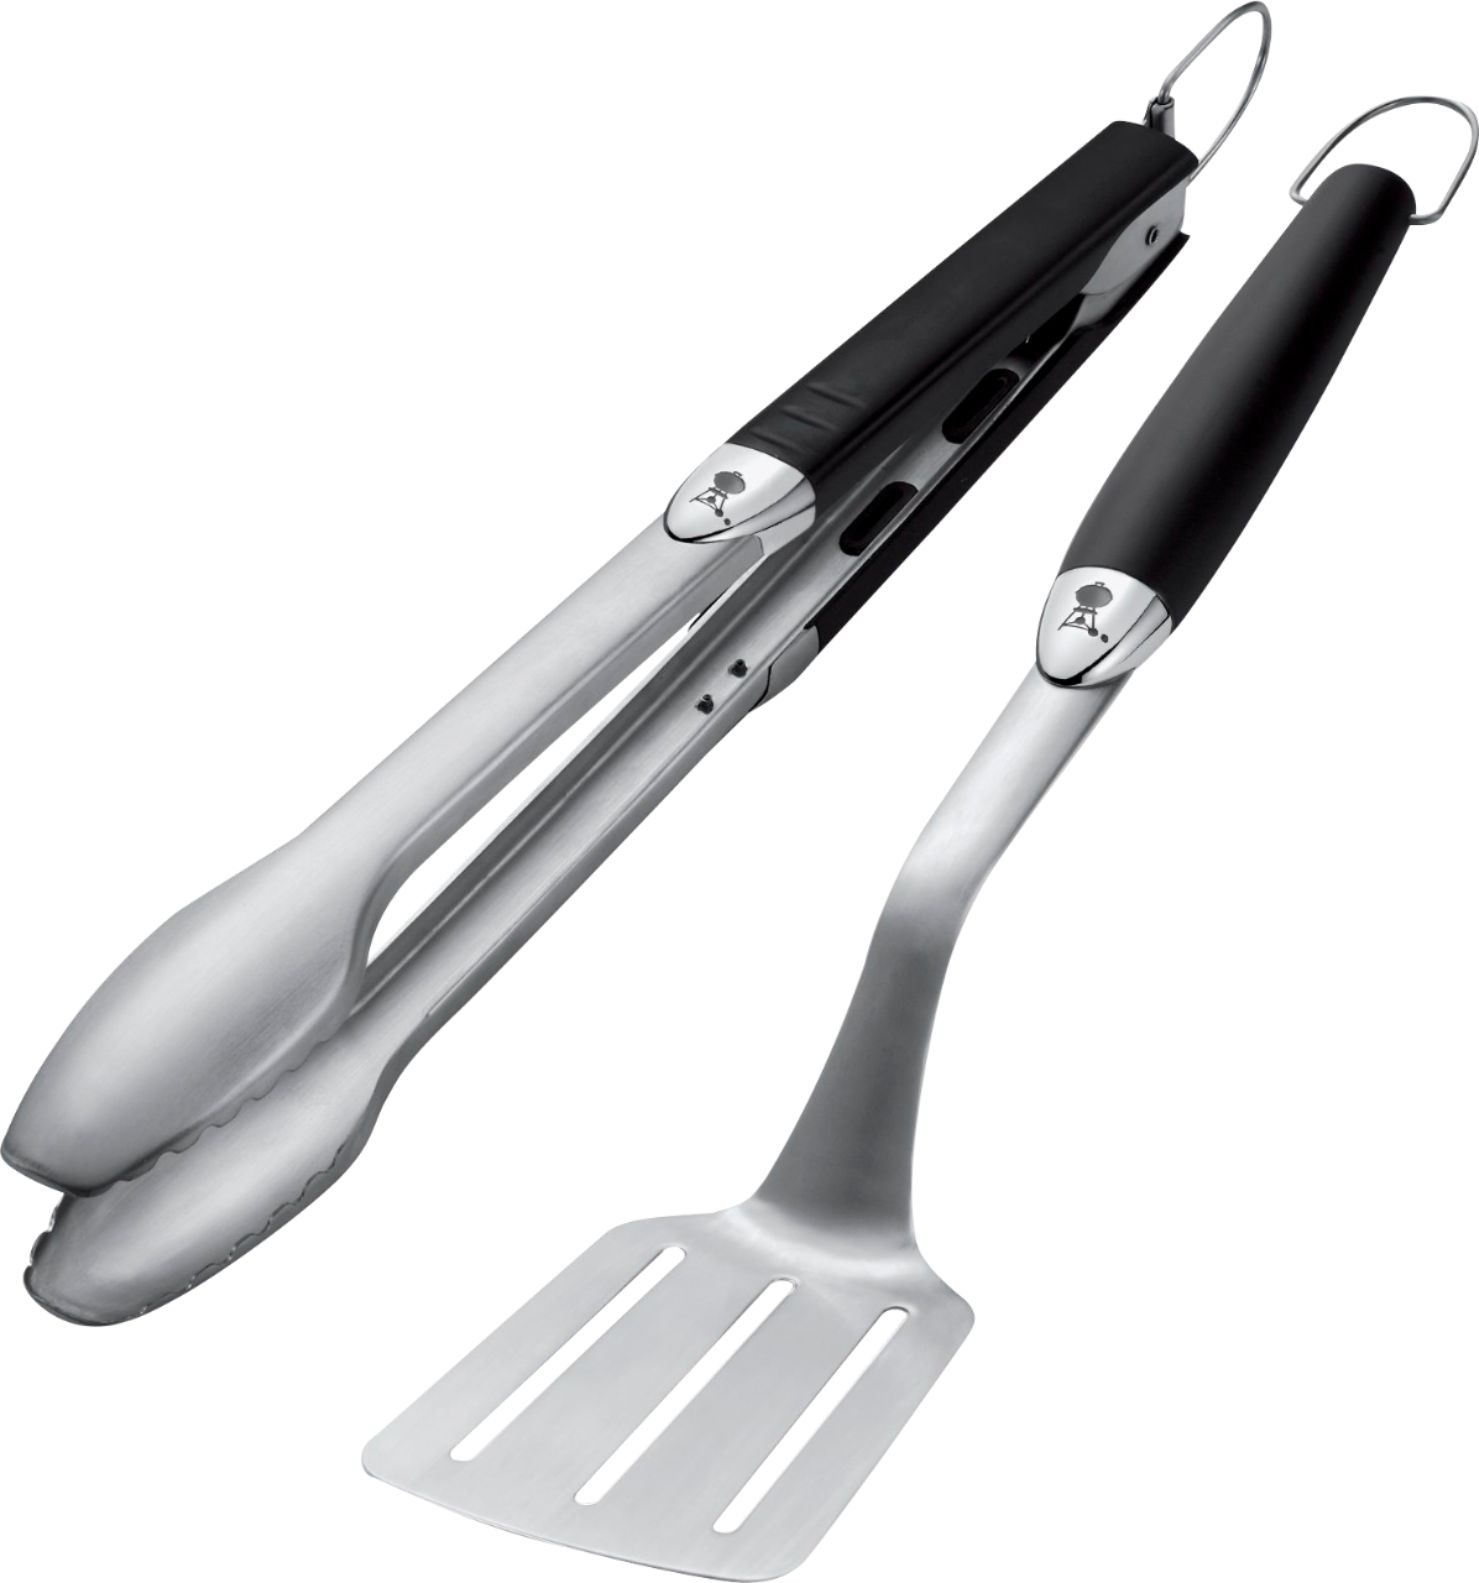 Whetstone Stainless Steel Dishwasher Safe Grilling Tool Set & Reviews